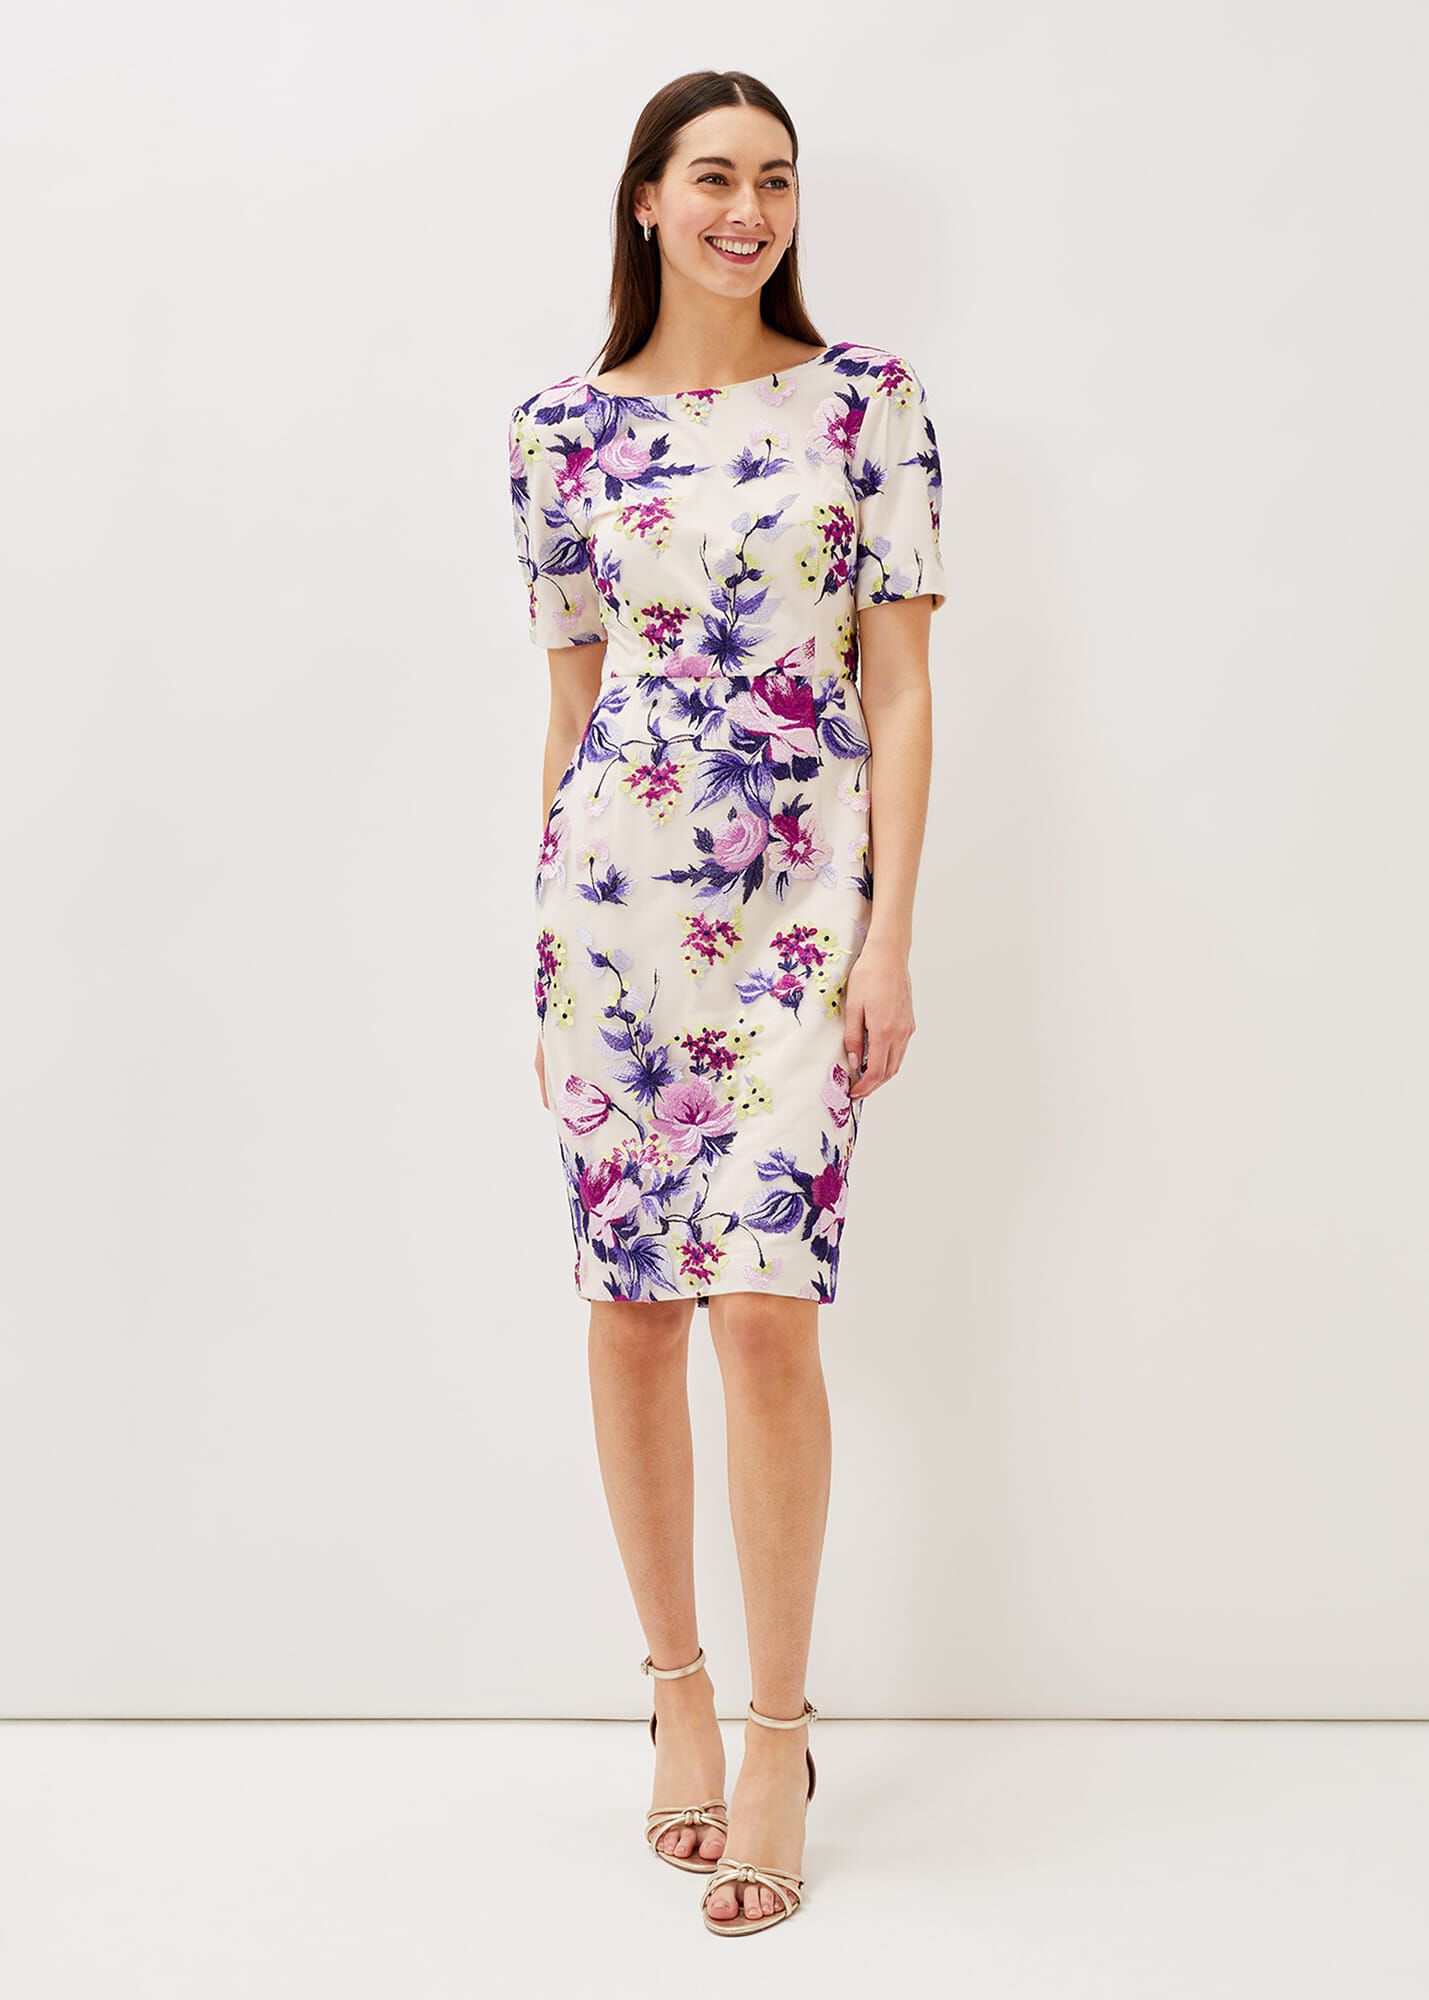 Lenora Embroidered Dress | Phase Eight